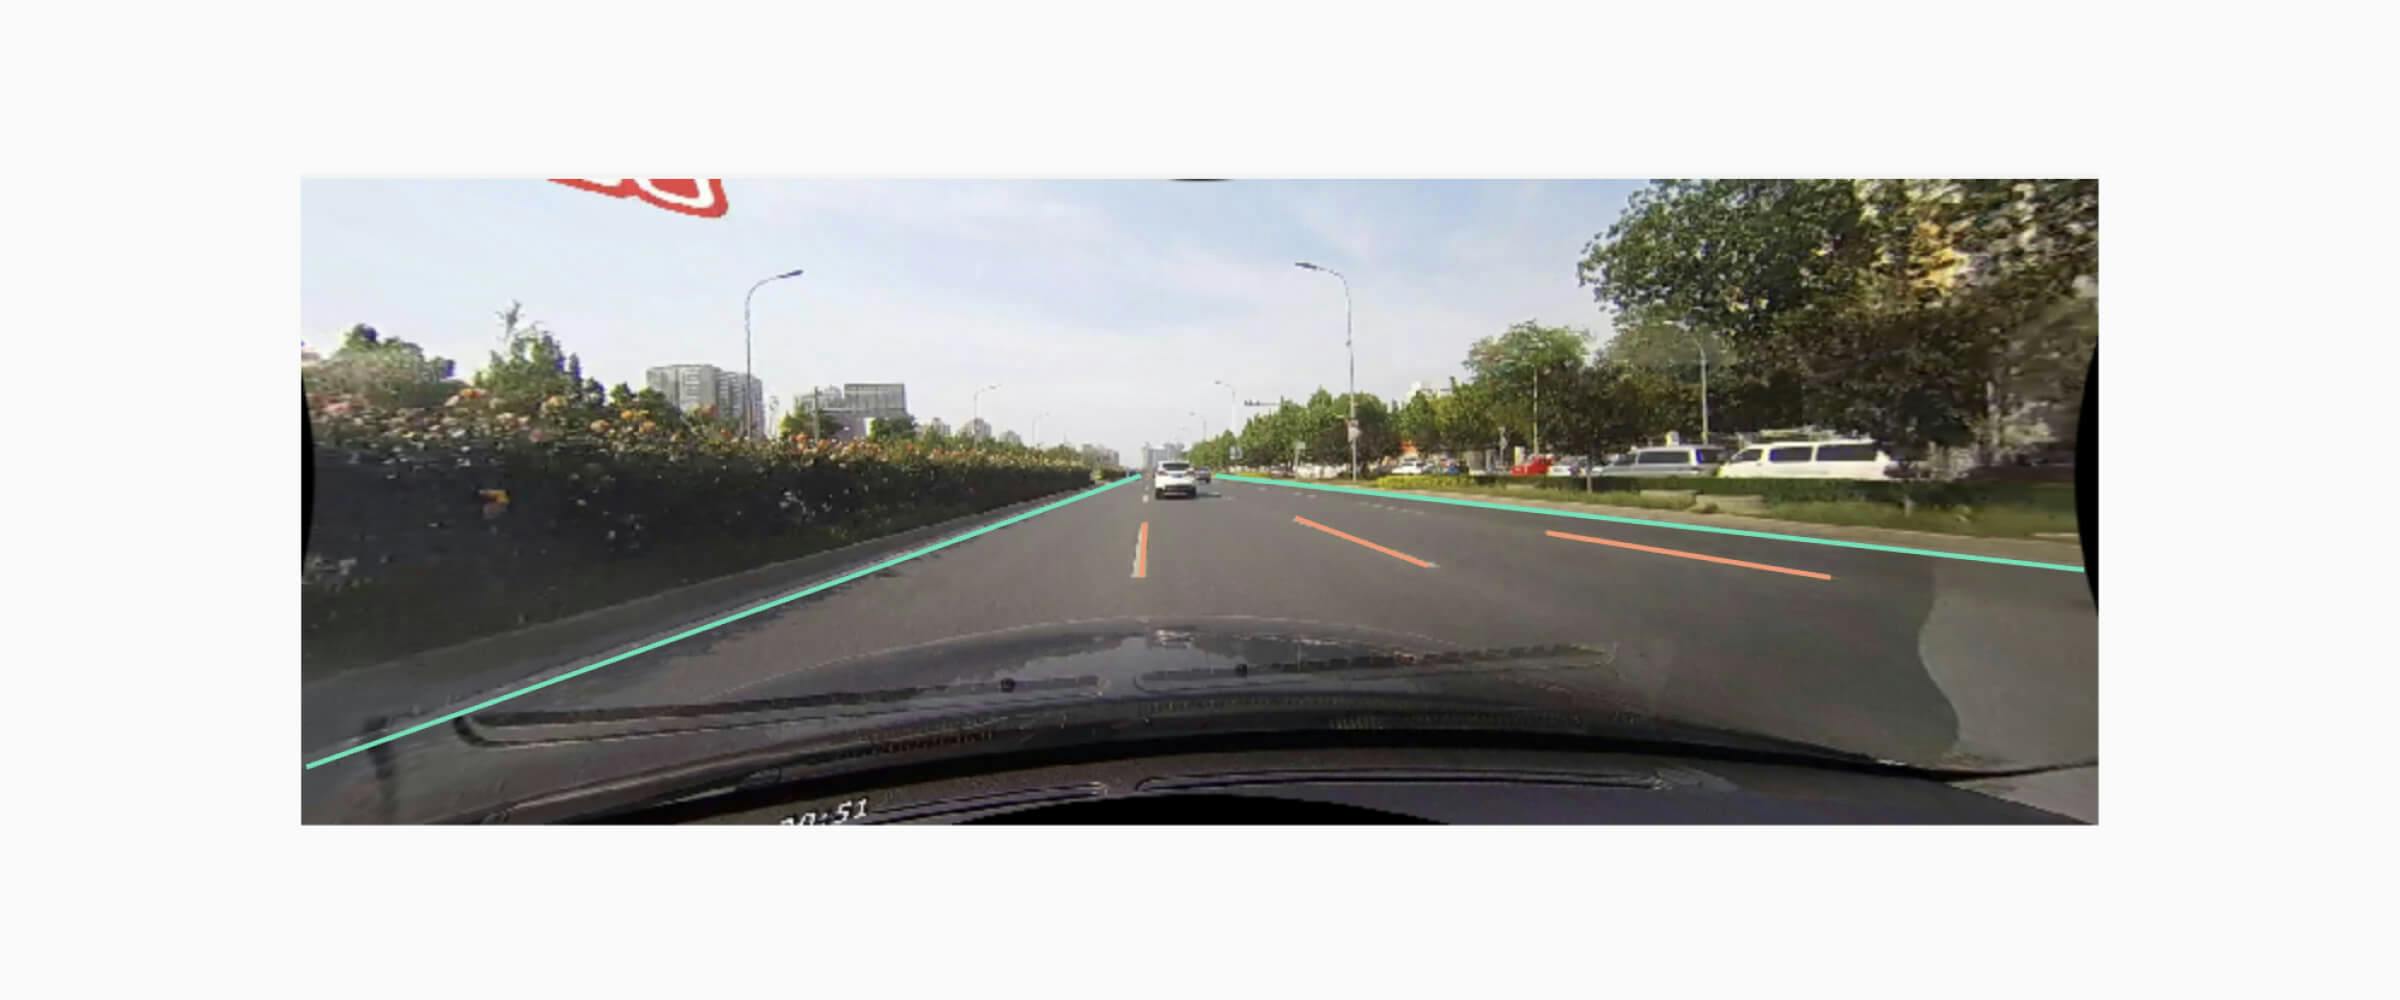 Example of polyline annotation for computer vision.